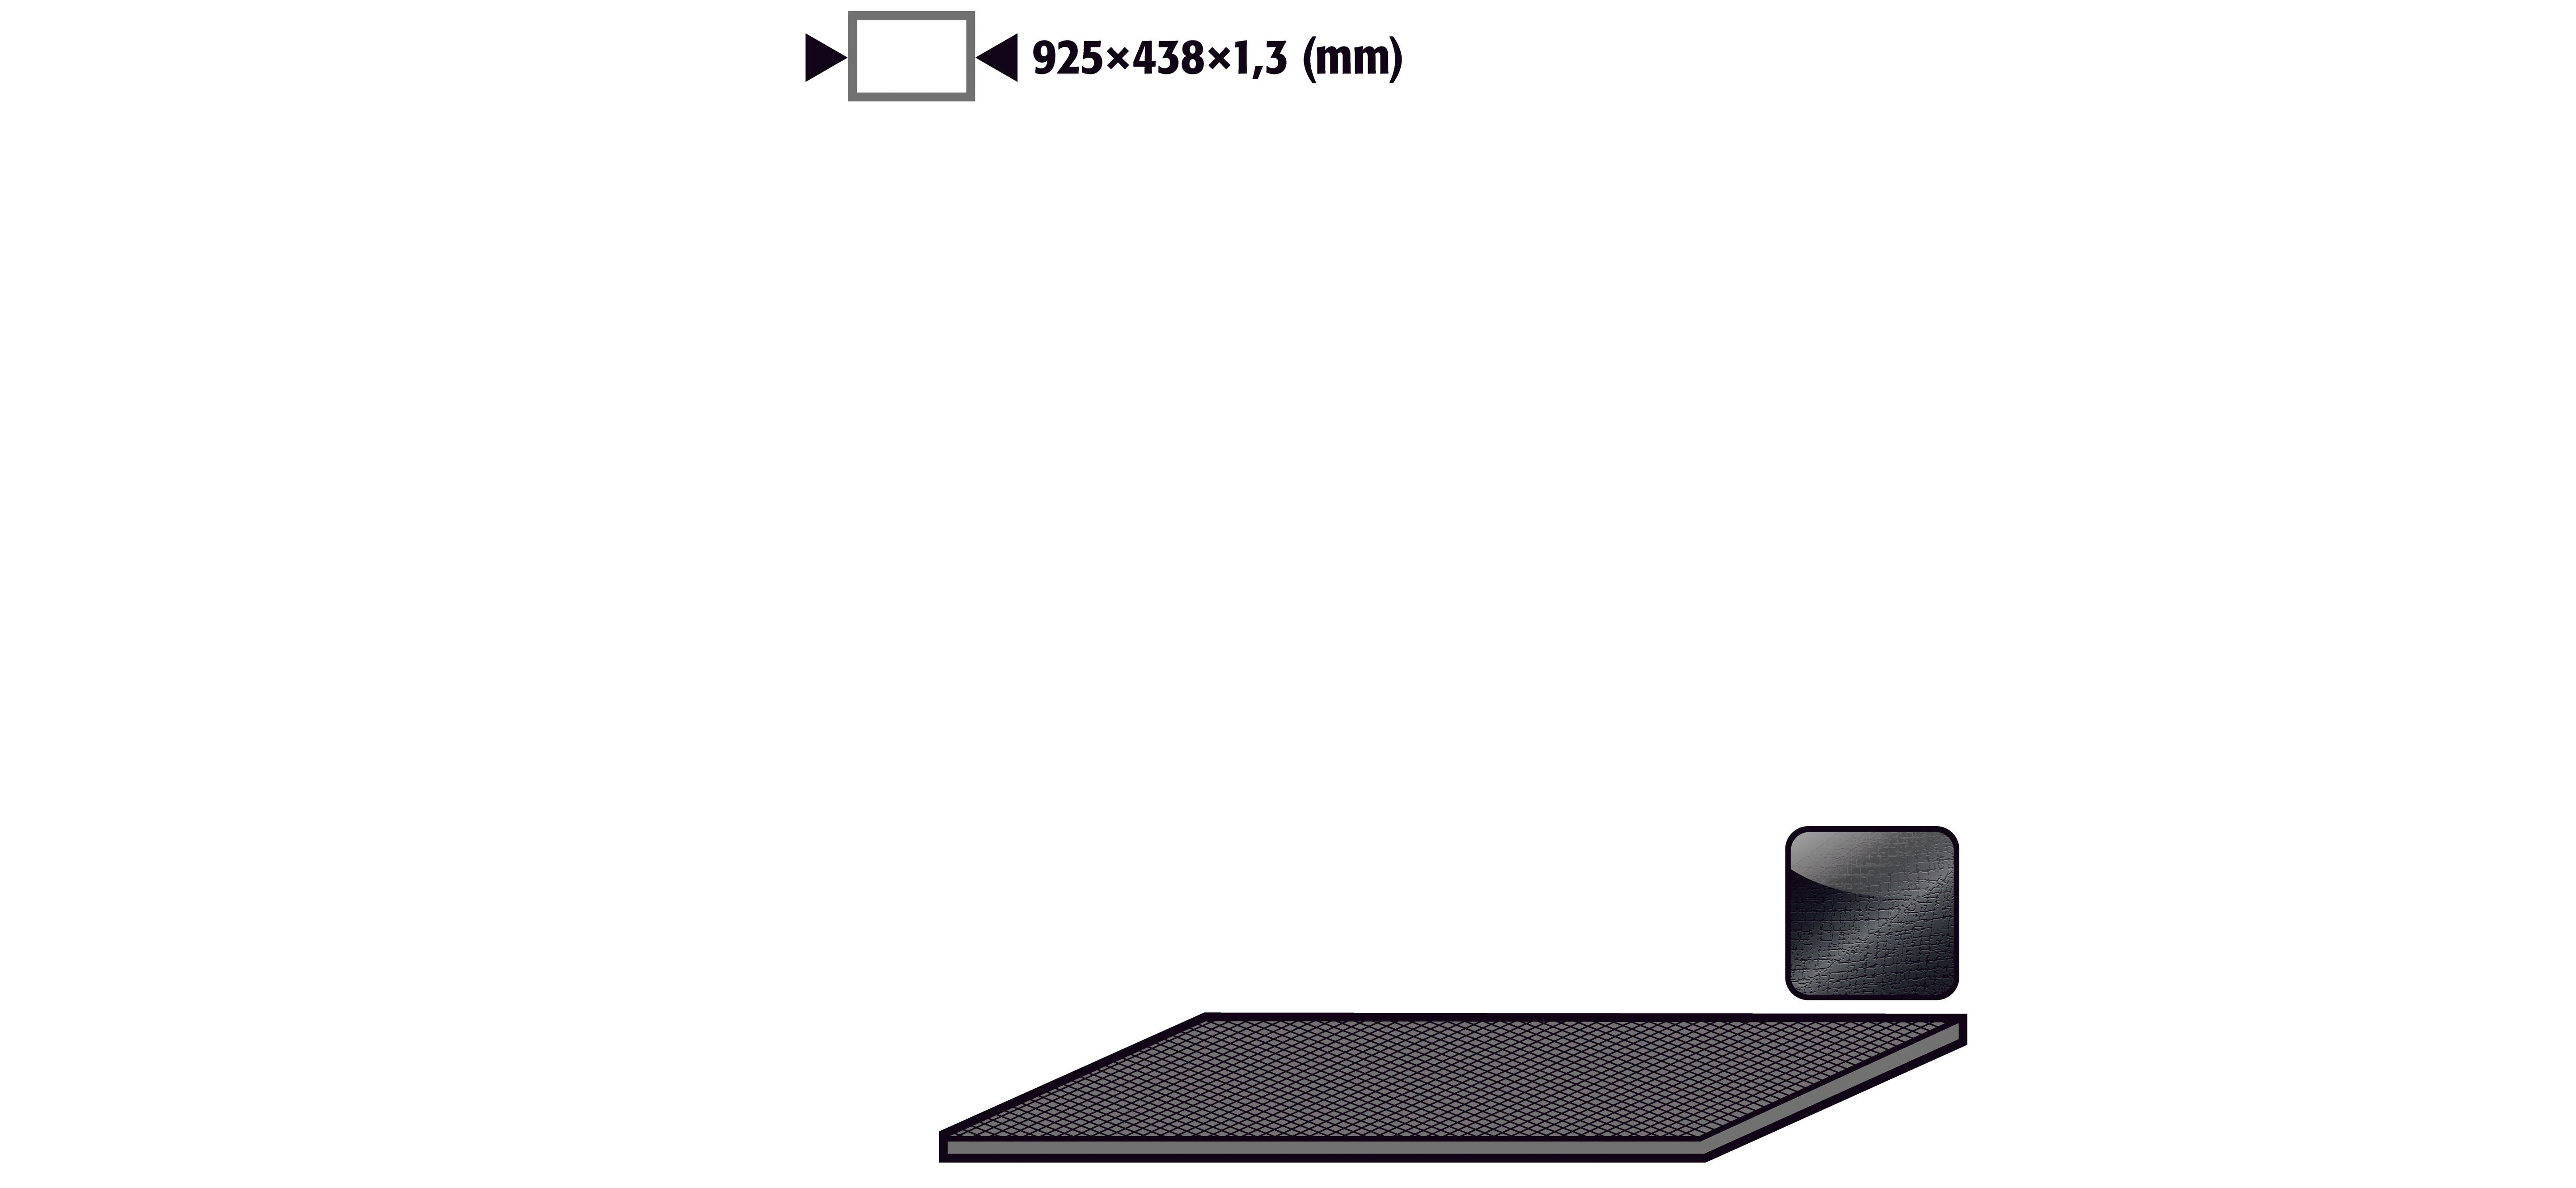 Anti-slip rubber mat for model(s): UB90, UB30 with width 1100 mm,